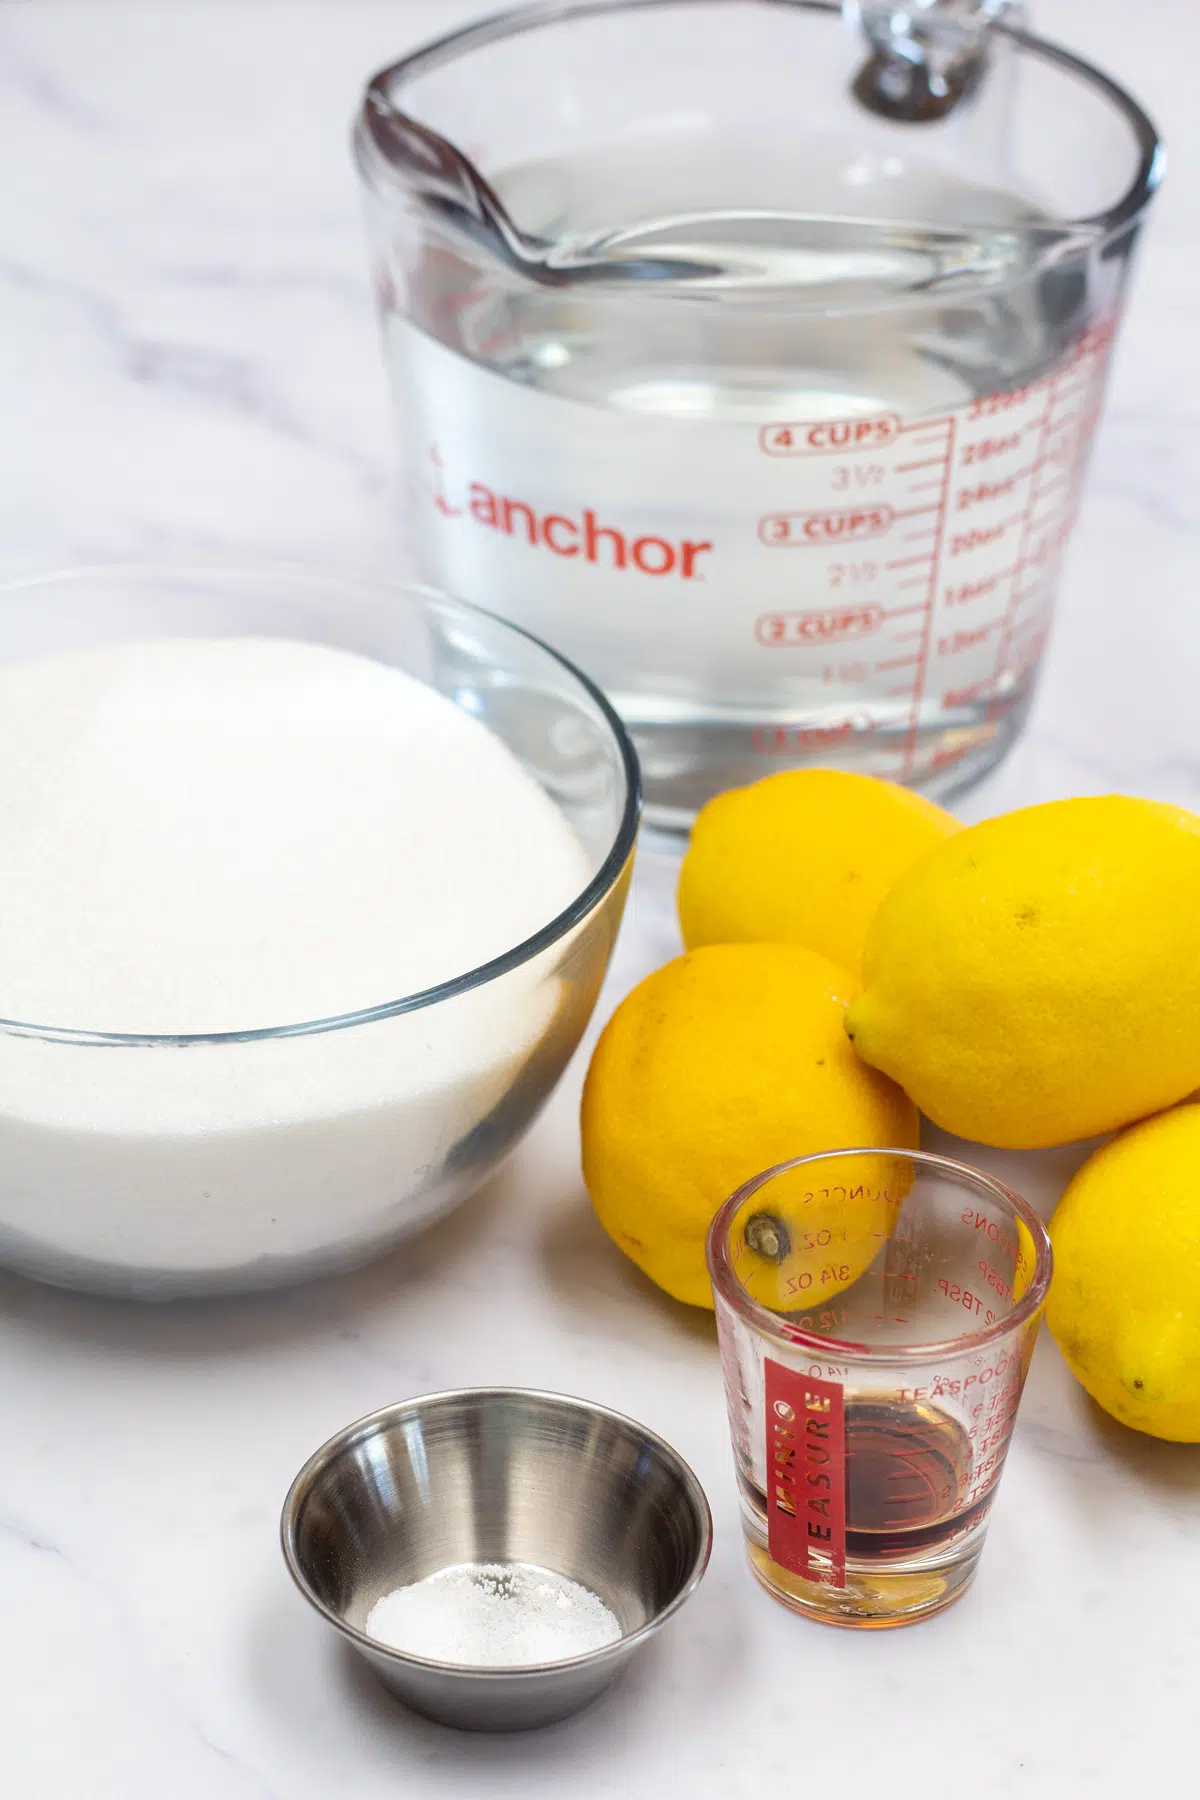 Photo showing ingredients needed for candied lemon slices.